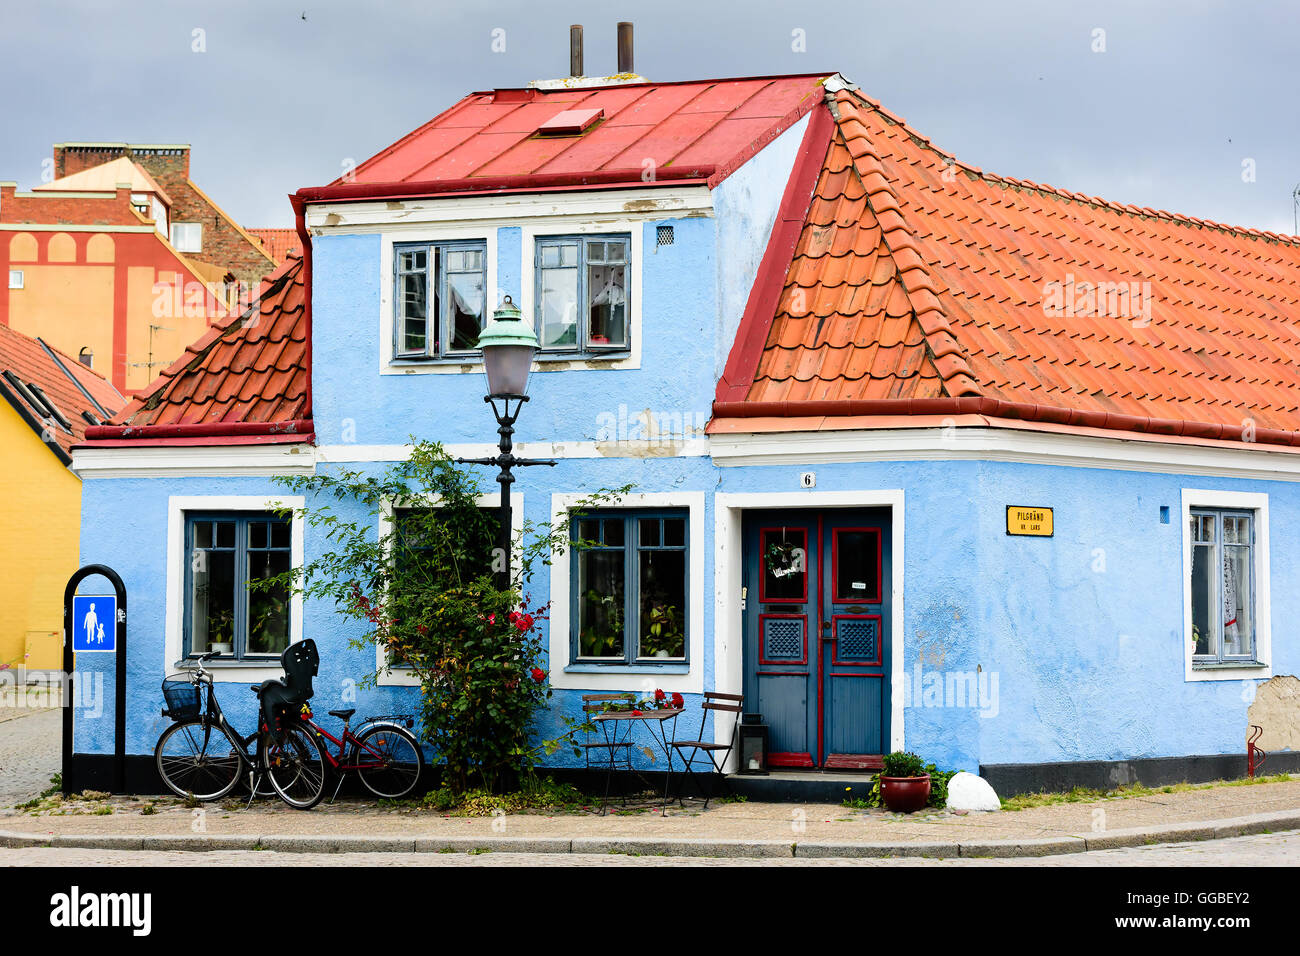 Ystad, Sweden - August 1, 2016: Old blue house in the corner of a street (Pilgrand) in the city. Small table and chairs under wi Stock Photo